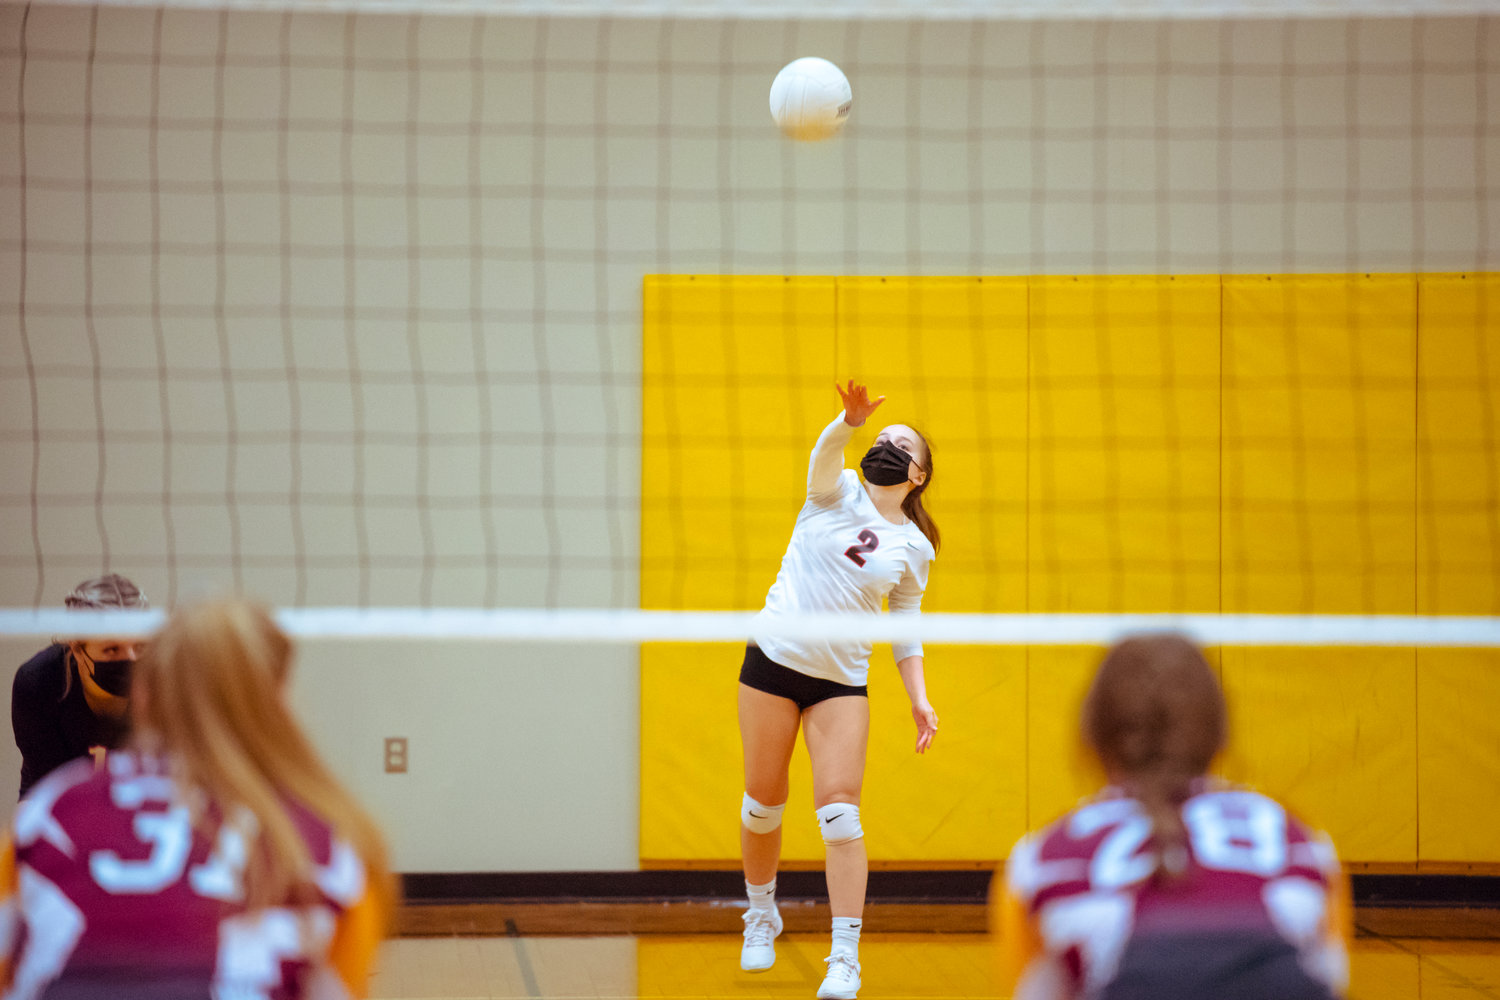 Toledo's Gracie Madill (2) serves the ball during a game against the Cardinals played Monday night in Winlock.